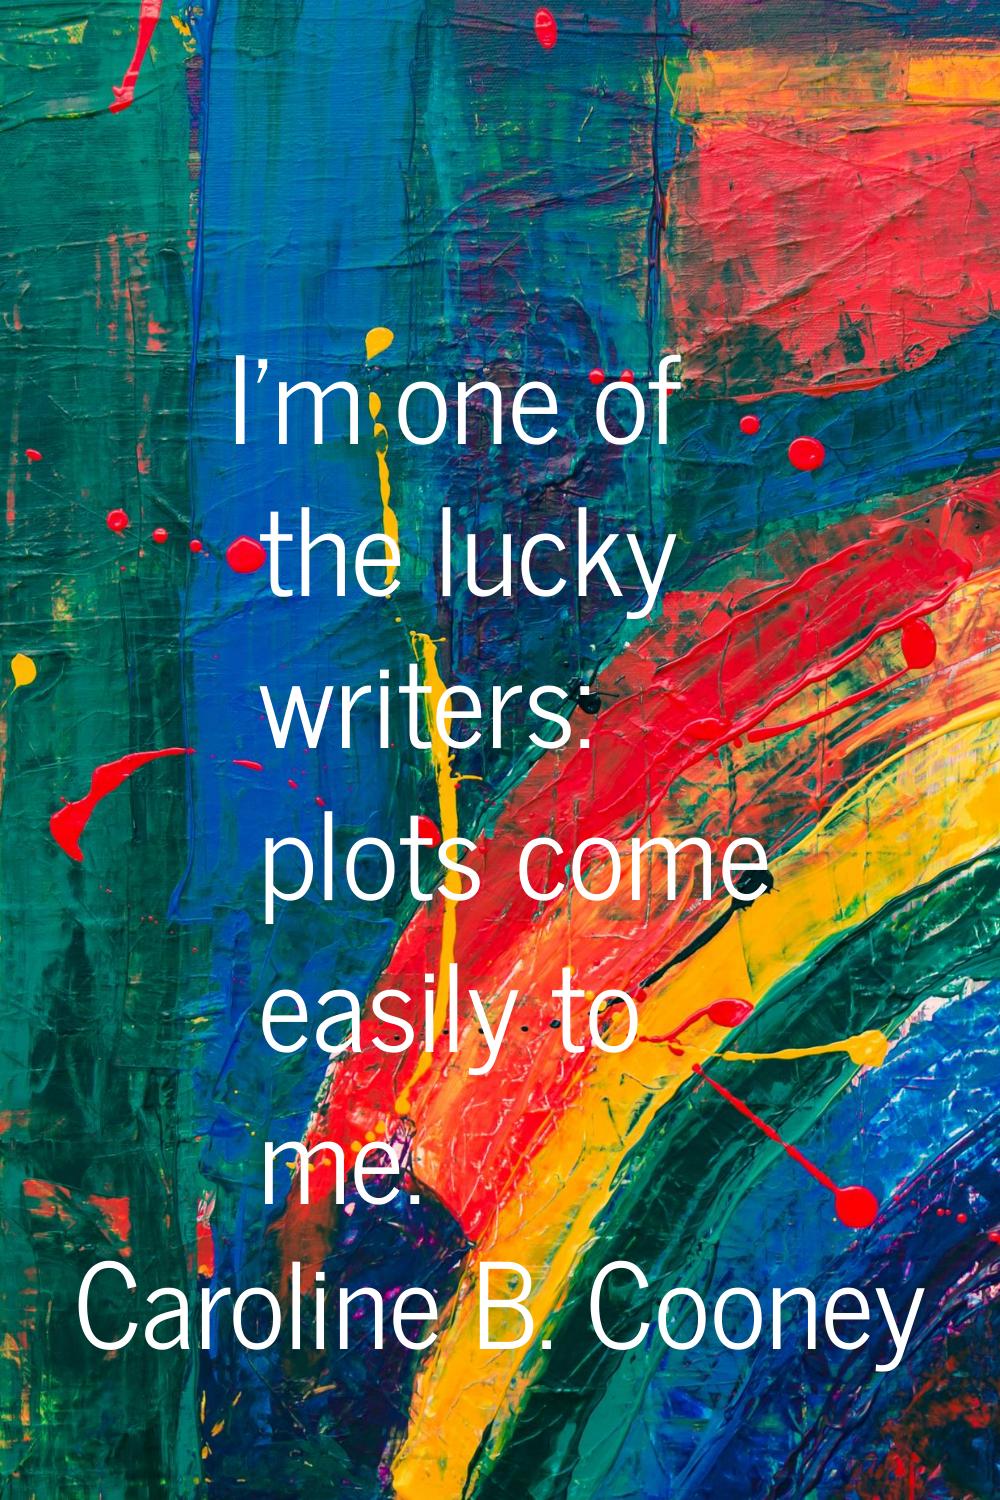 I'm one of the lucky writers: plots come easily to me.